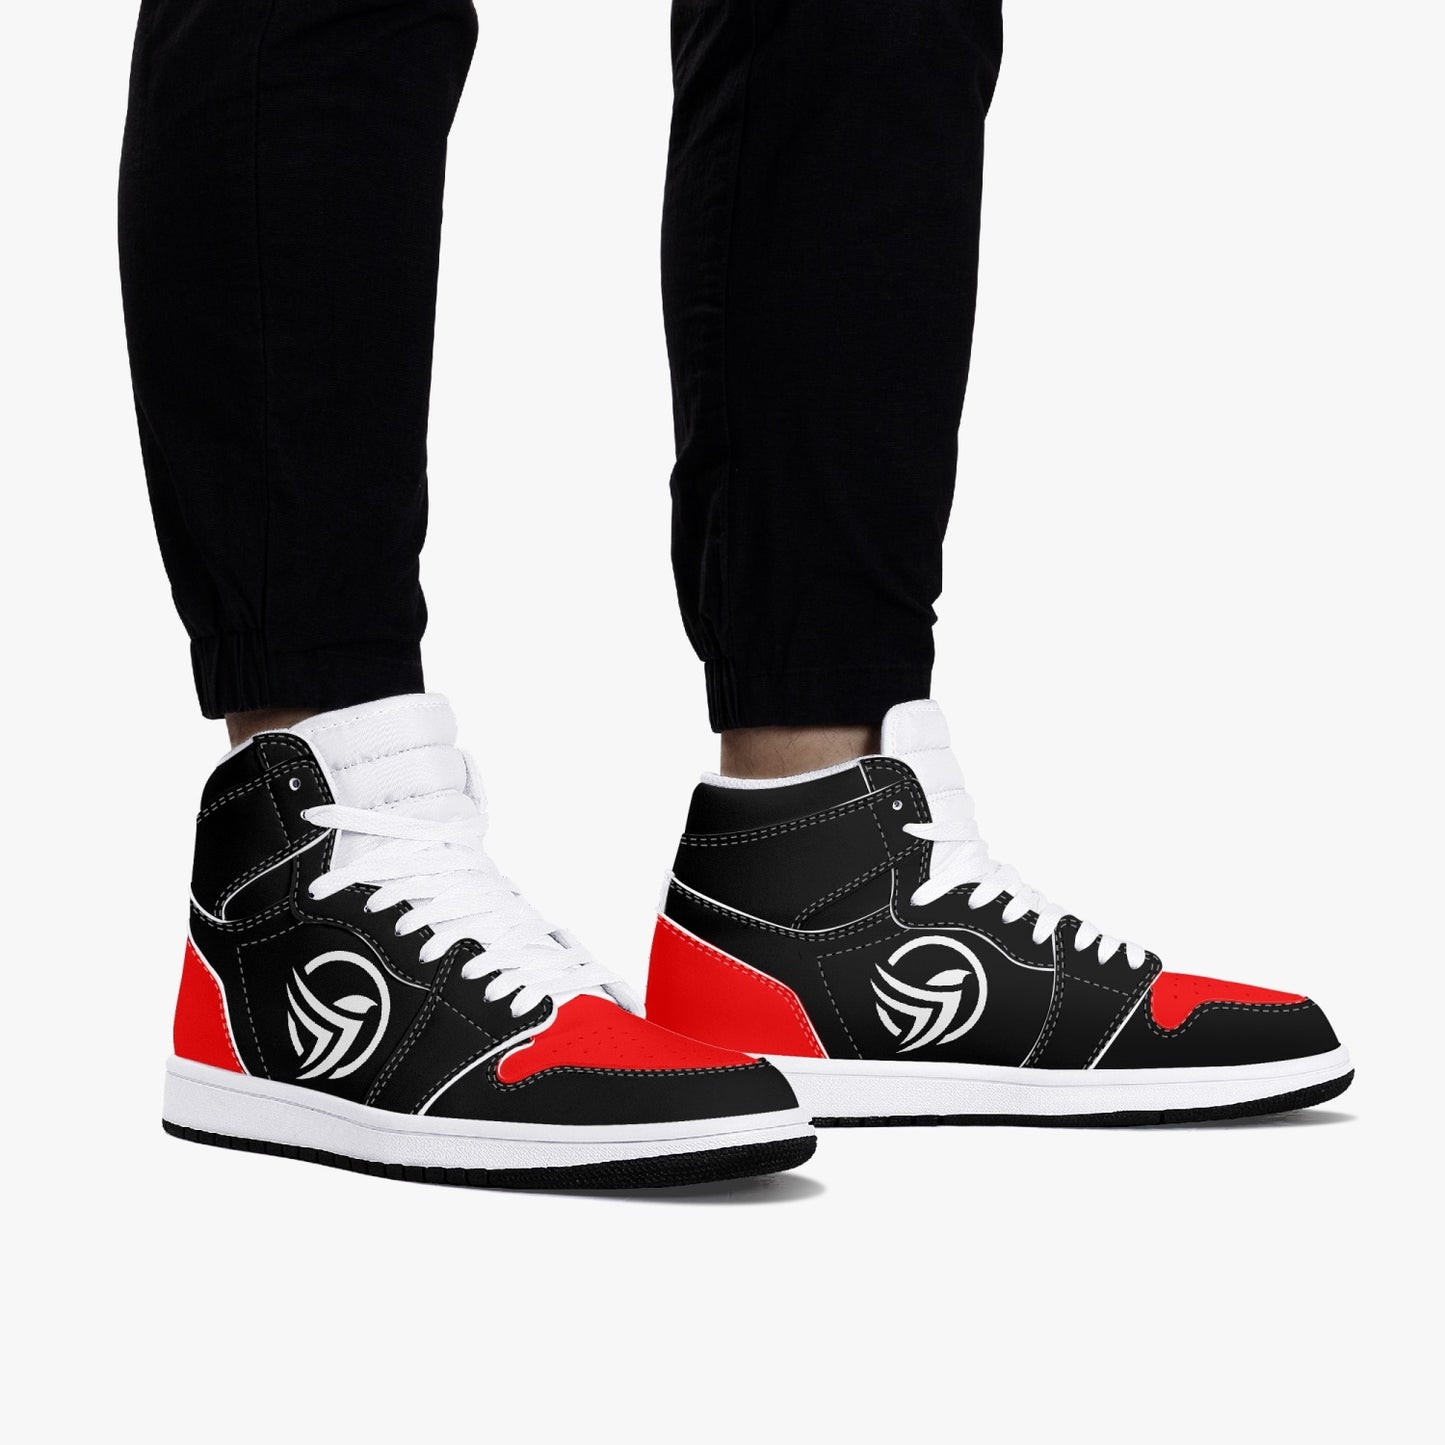 Unstax Red/Black High-Top Leather Sneakers